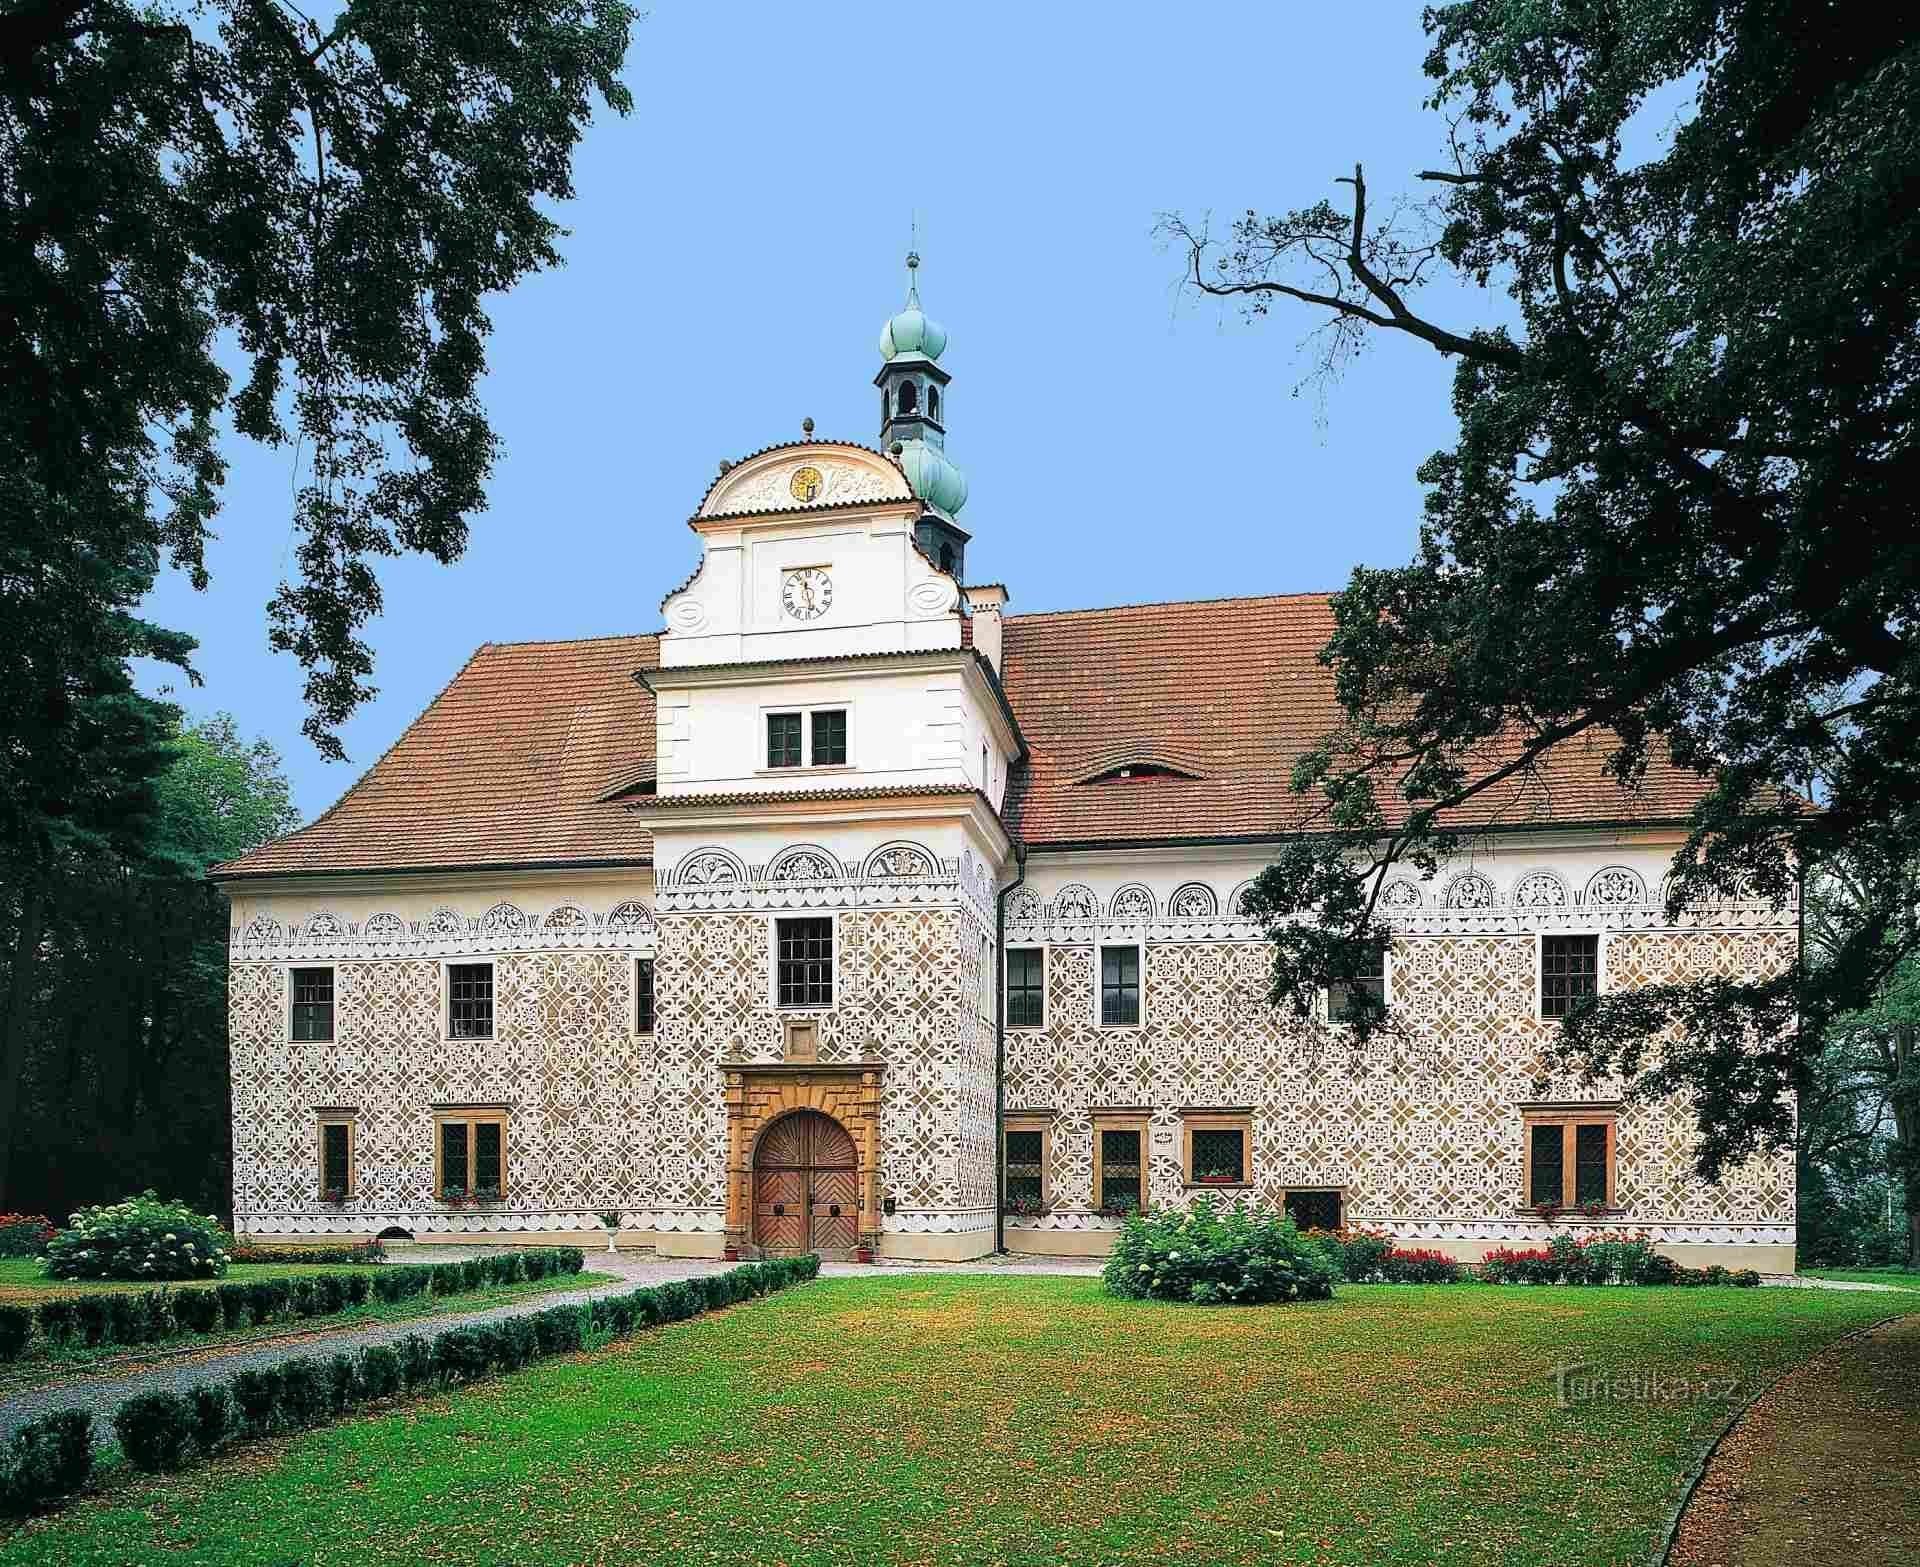 Chateau Doudleby nad Orlici